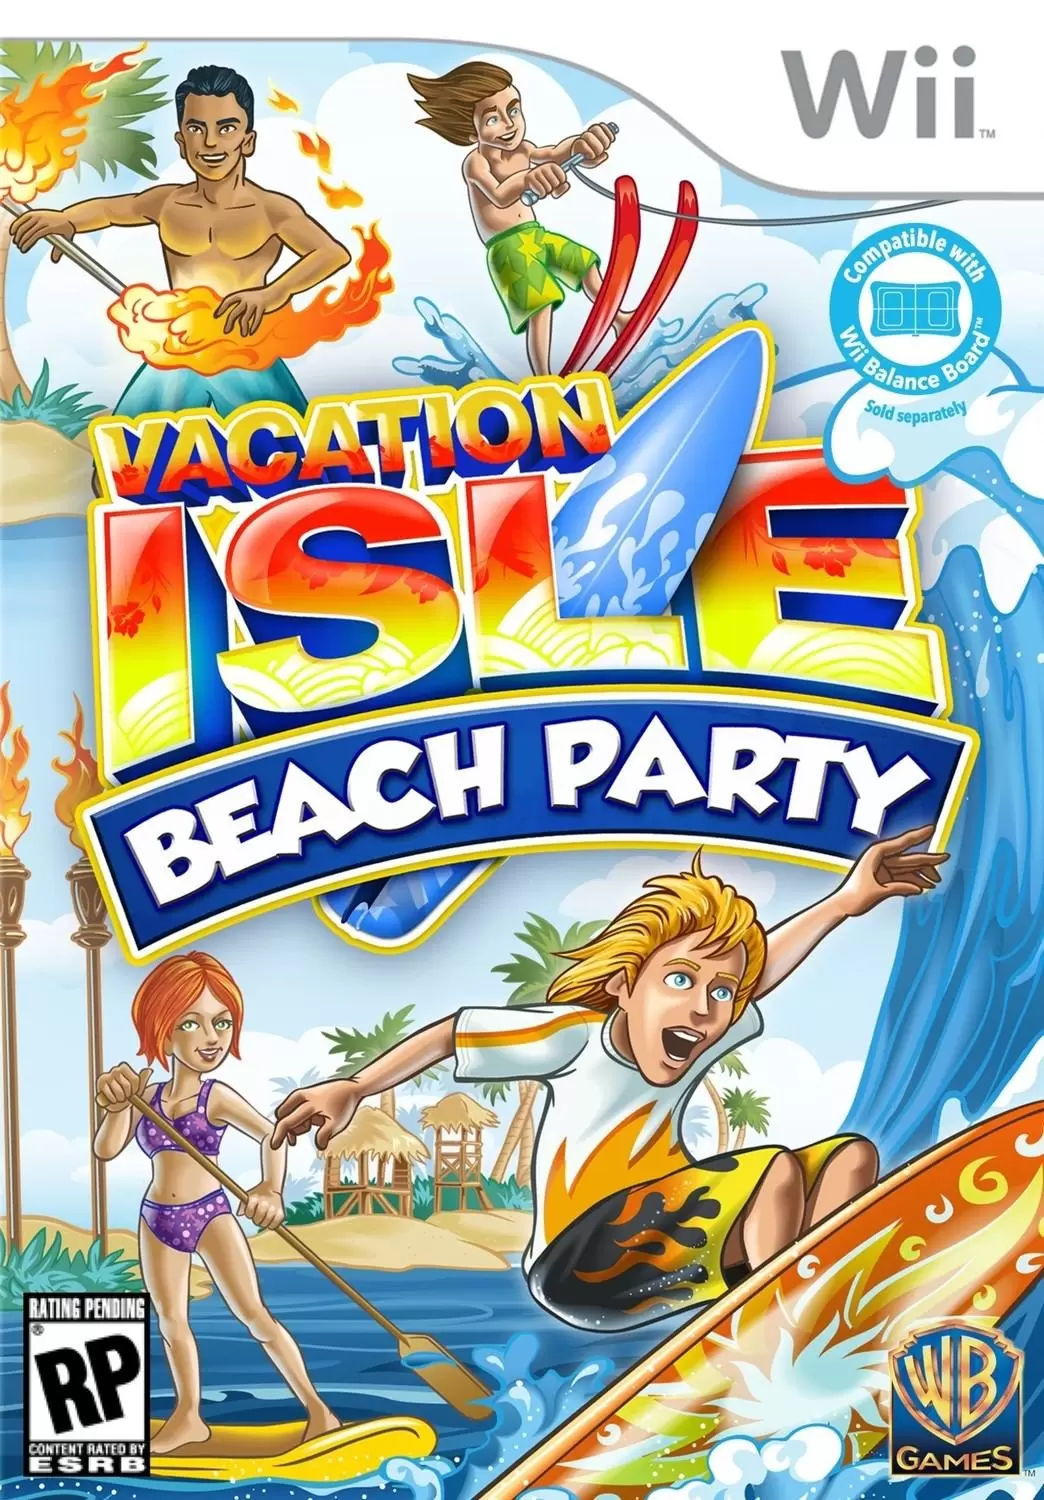 Nintendo Wii Games - Vacation Isle Beach Party